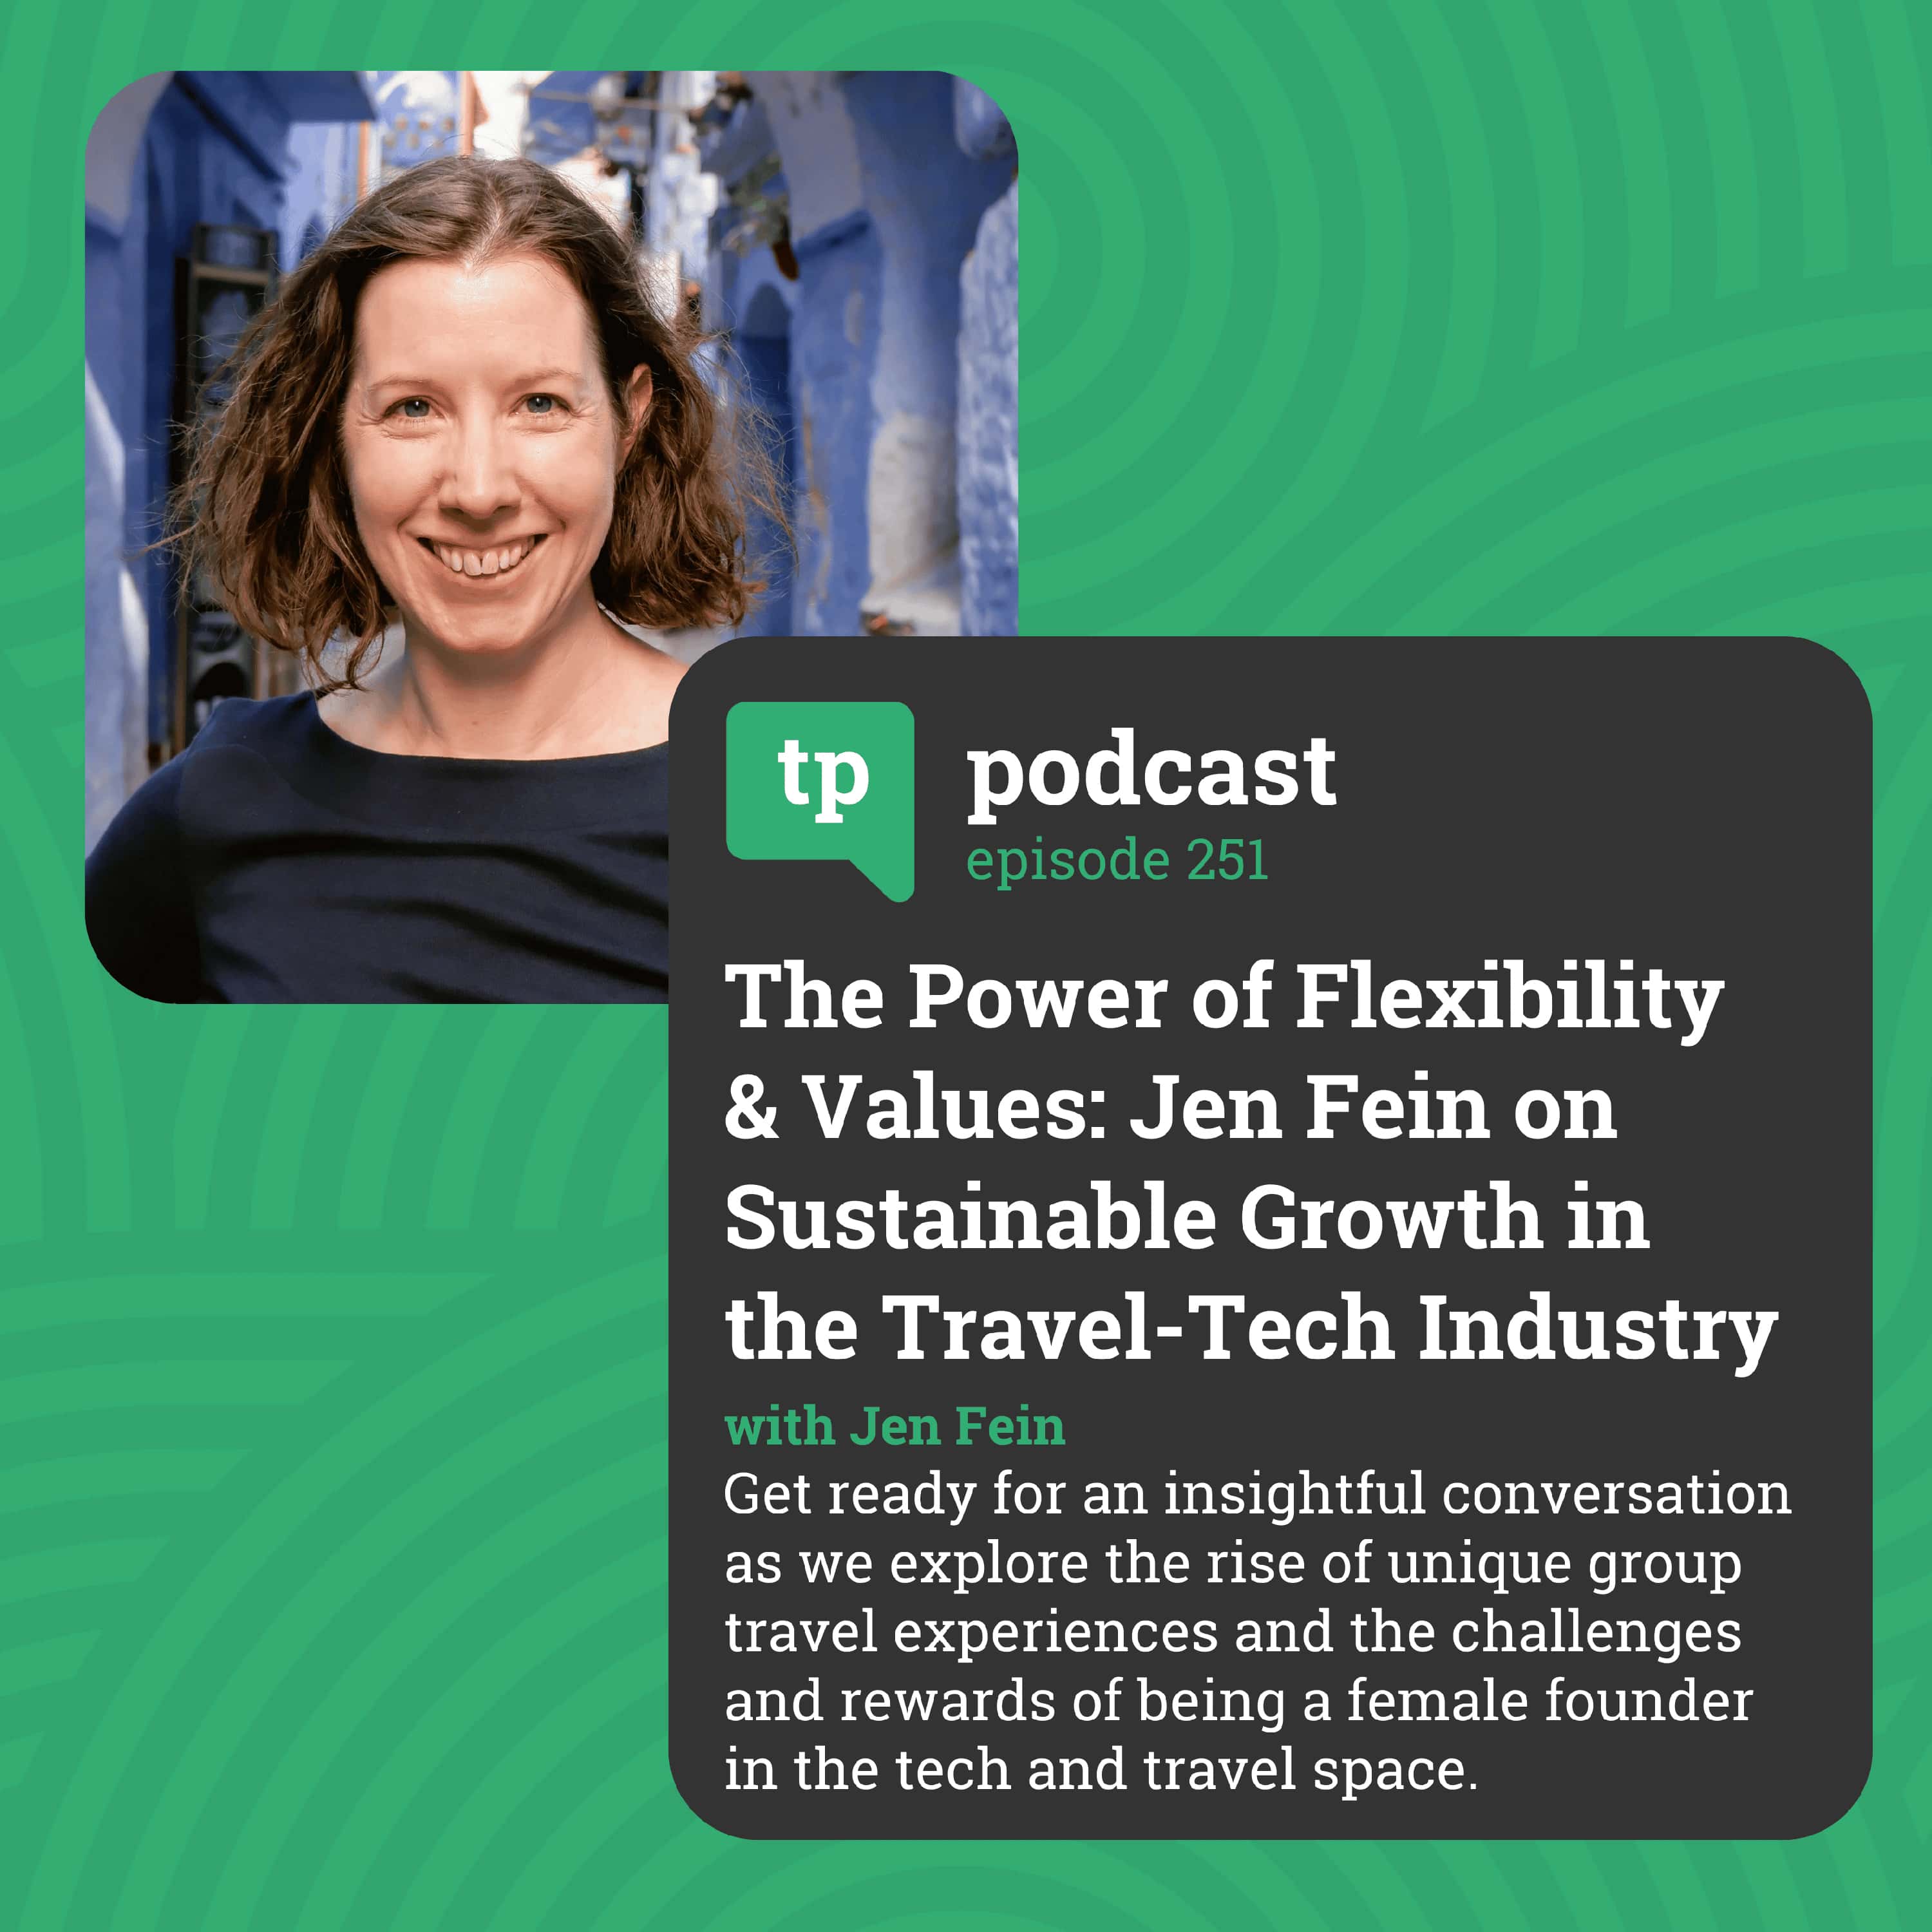 The Power of Flexibility & Values: Jen Fein on Sustainable Growth in the Travel-Tech Industry